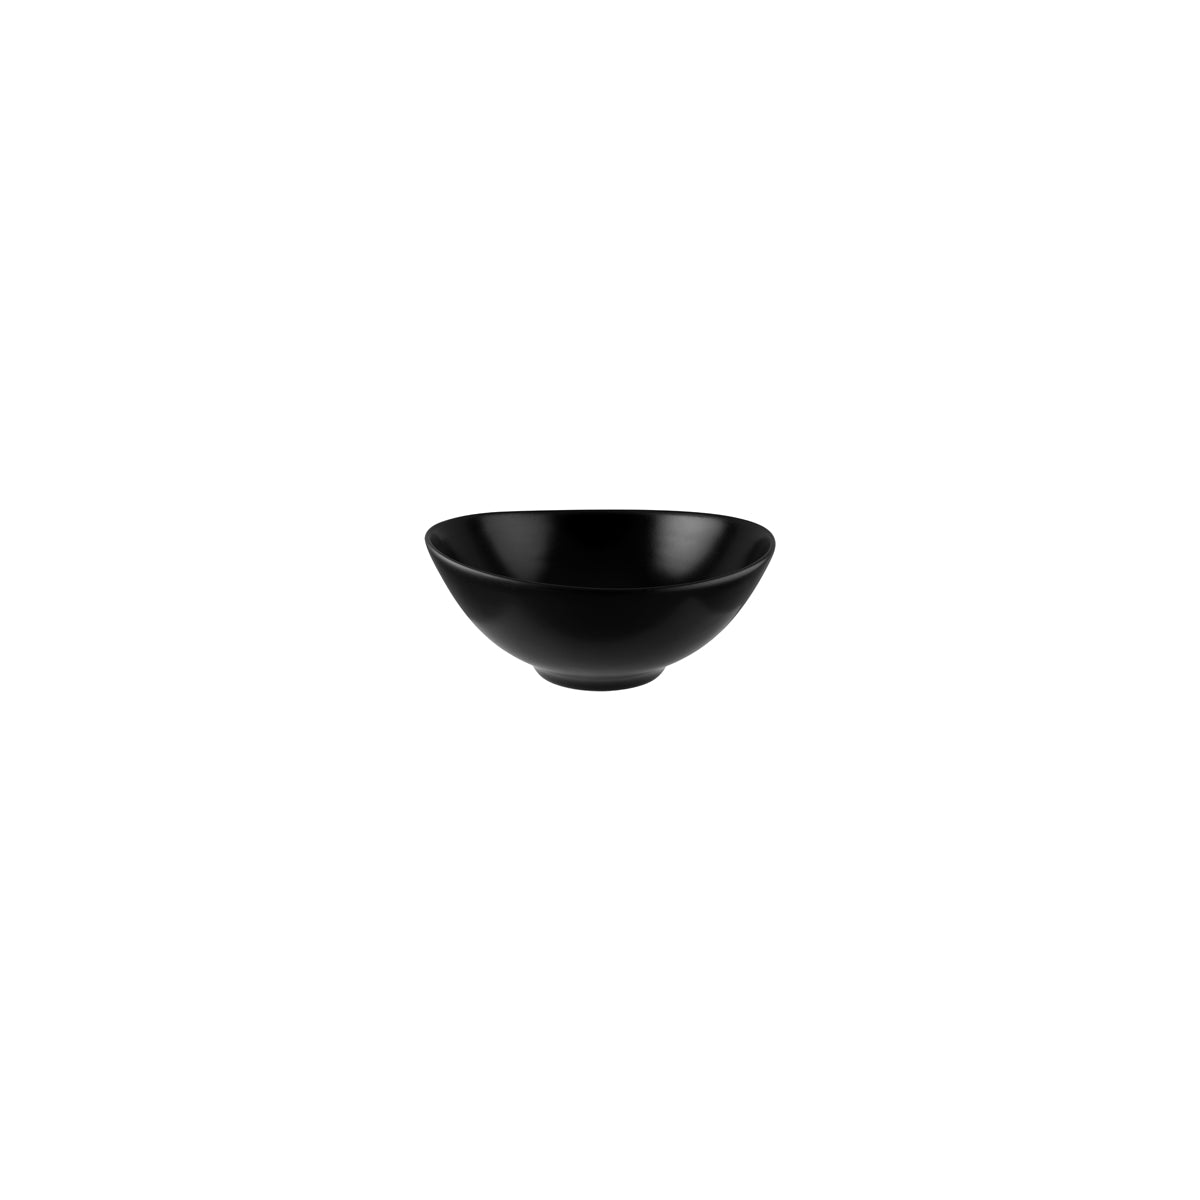 Notte Agora Round Bowl 160mm, 640ml : Pack of 12